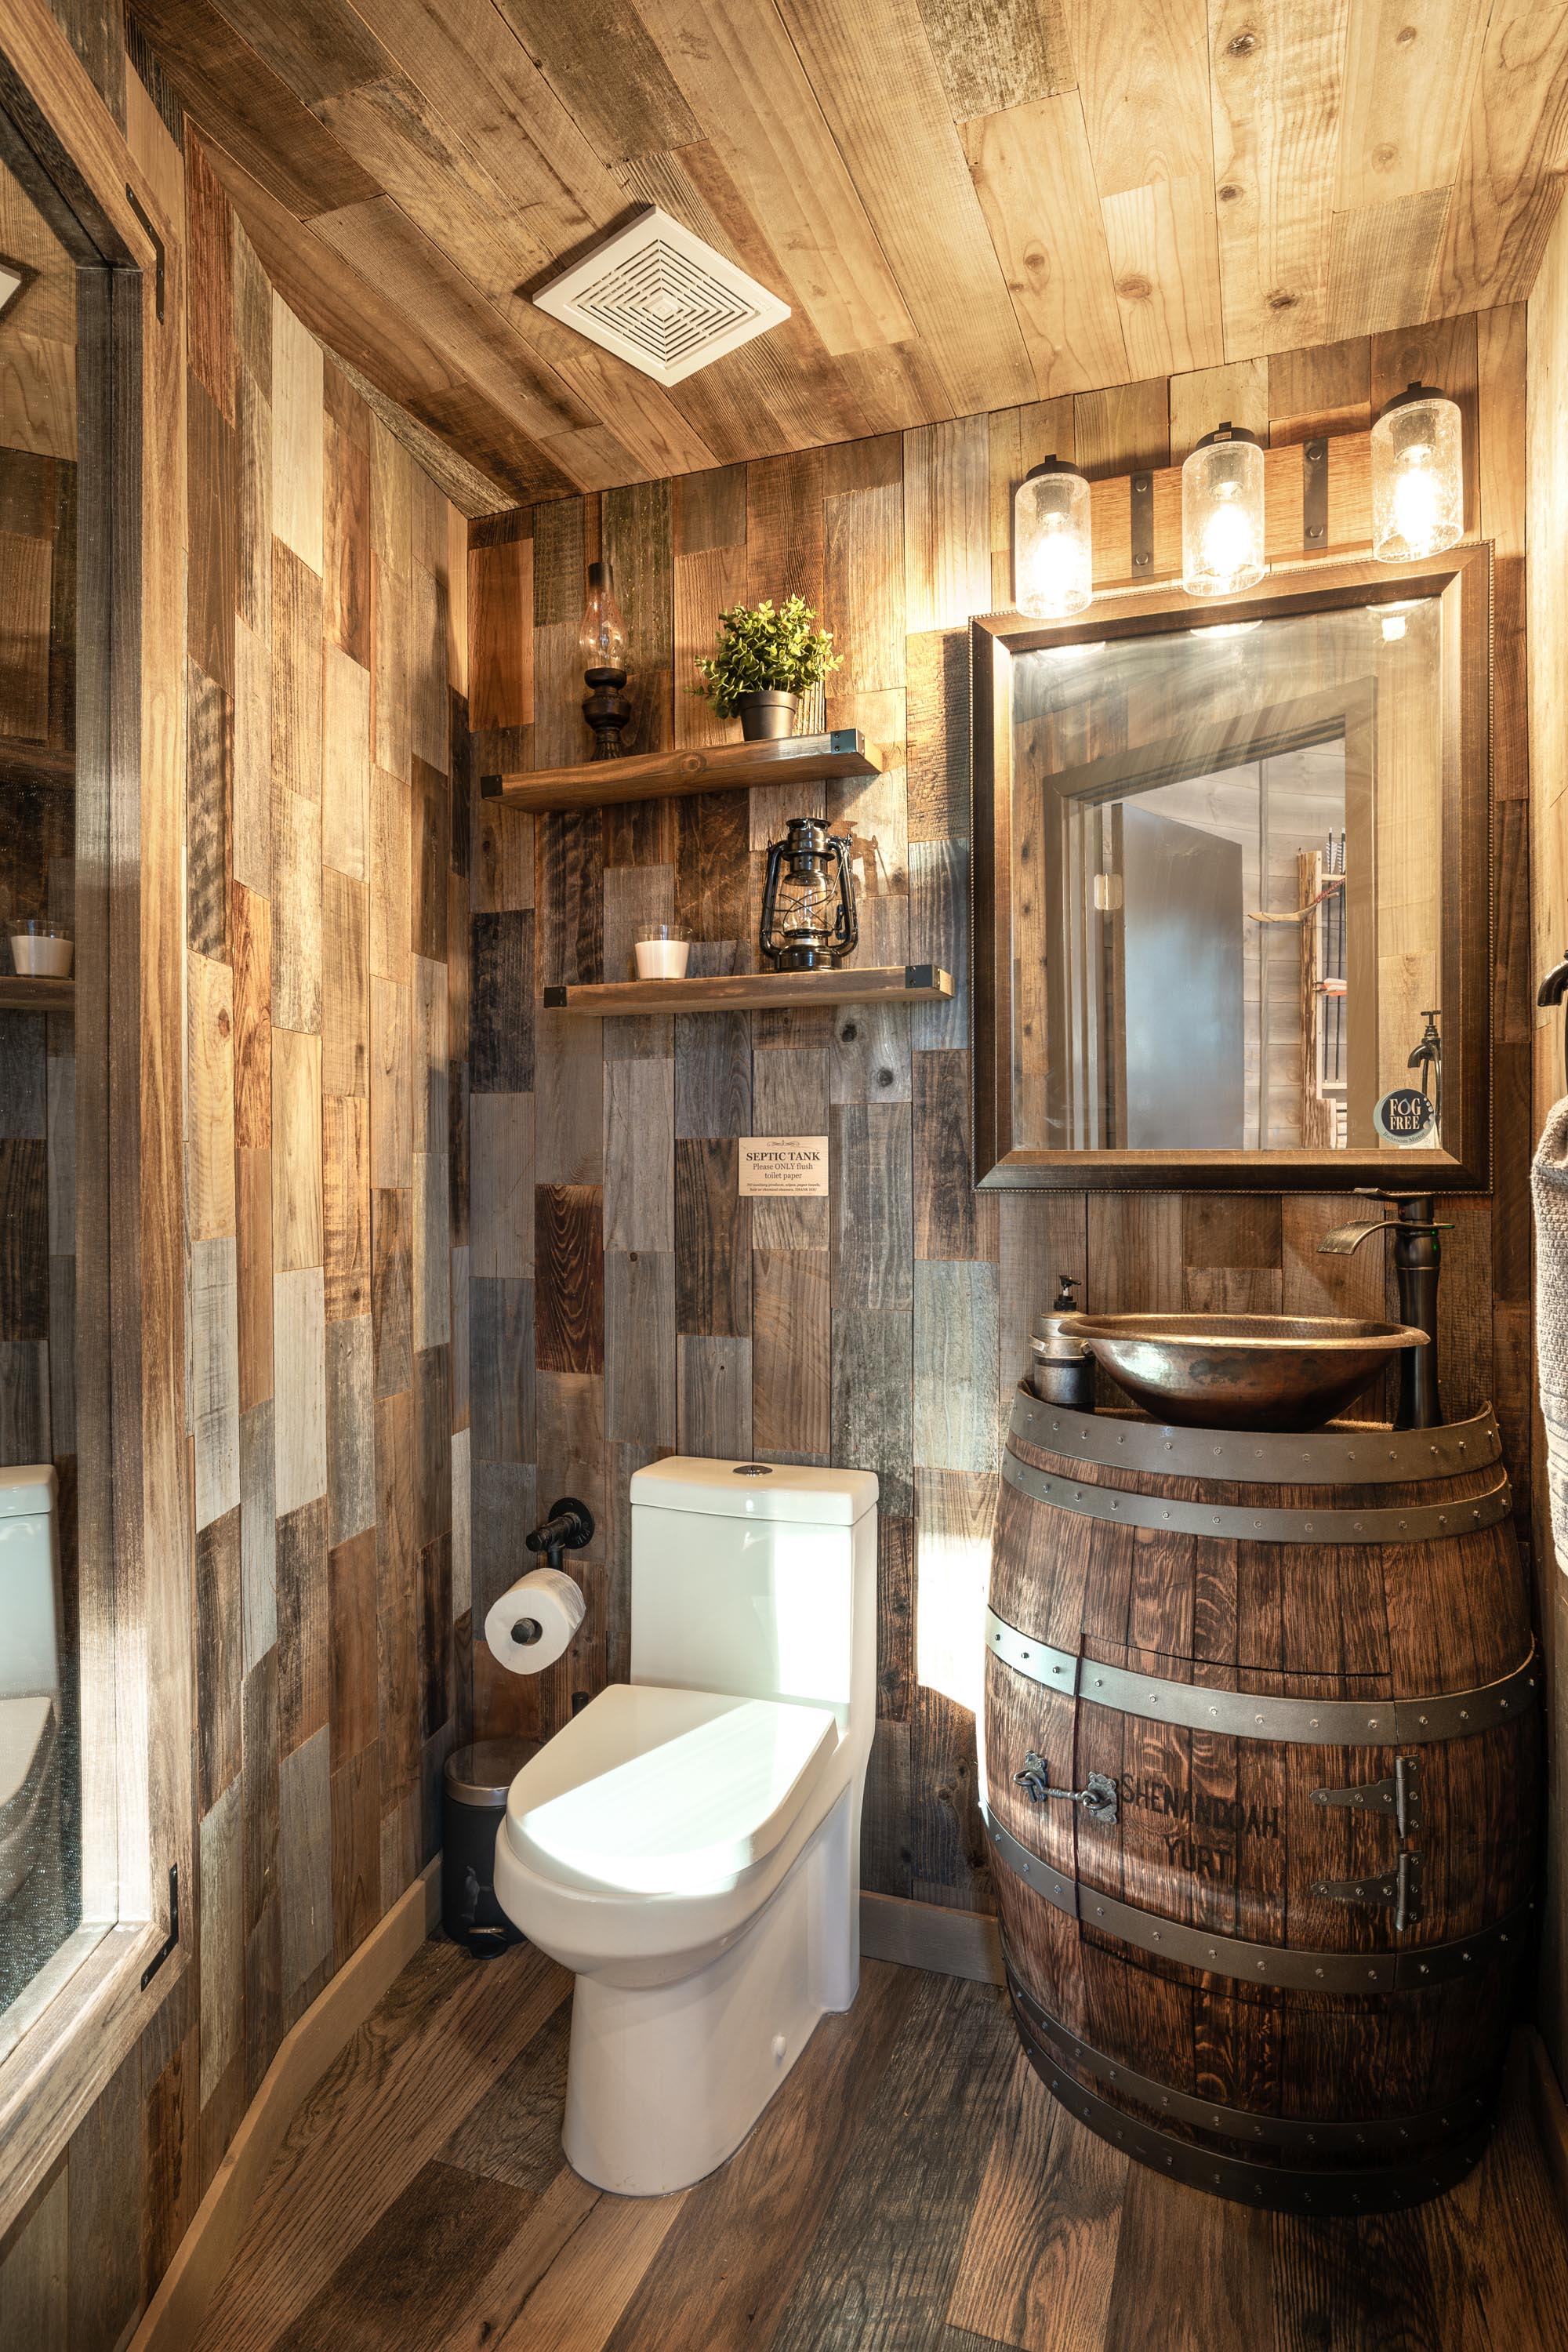 <span  class="uc_style_uc_tiles_grid_image_elementor_uc_items_attribute_title" style="color:#ffffff;">Cozy second bathroom with a wine-barrel sink</span>